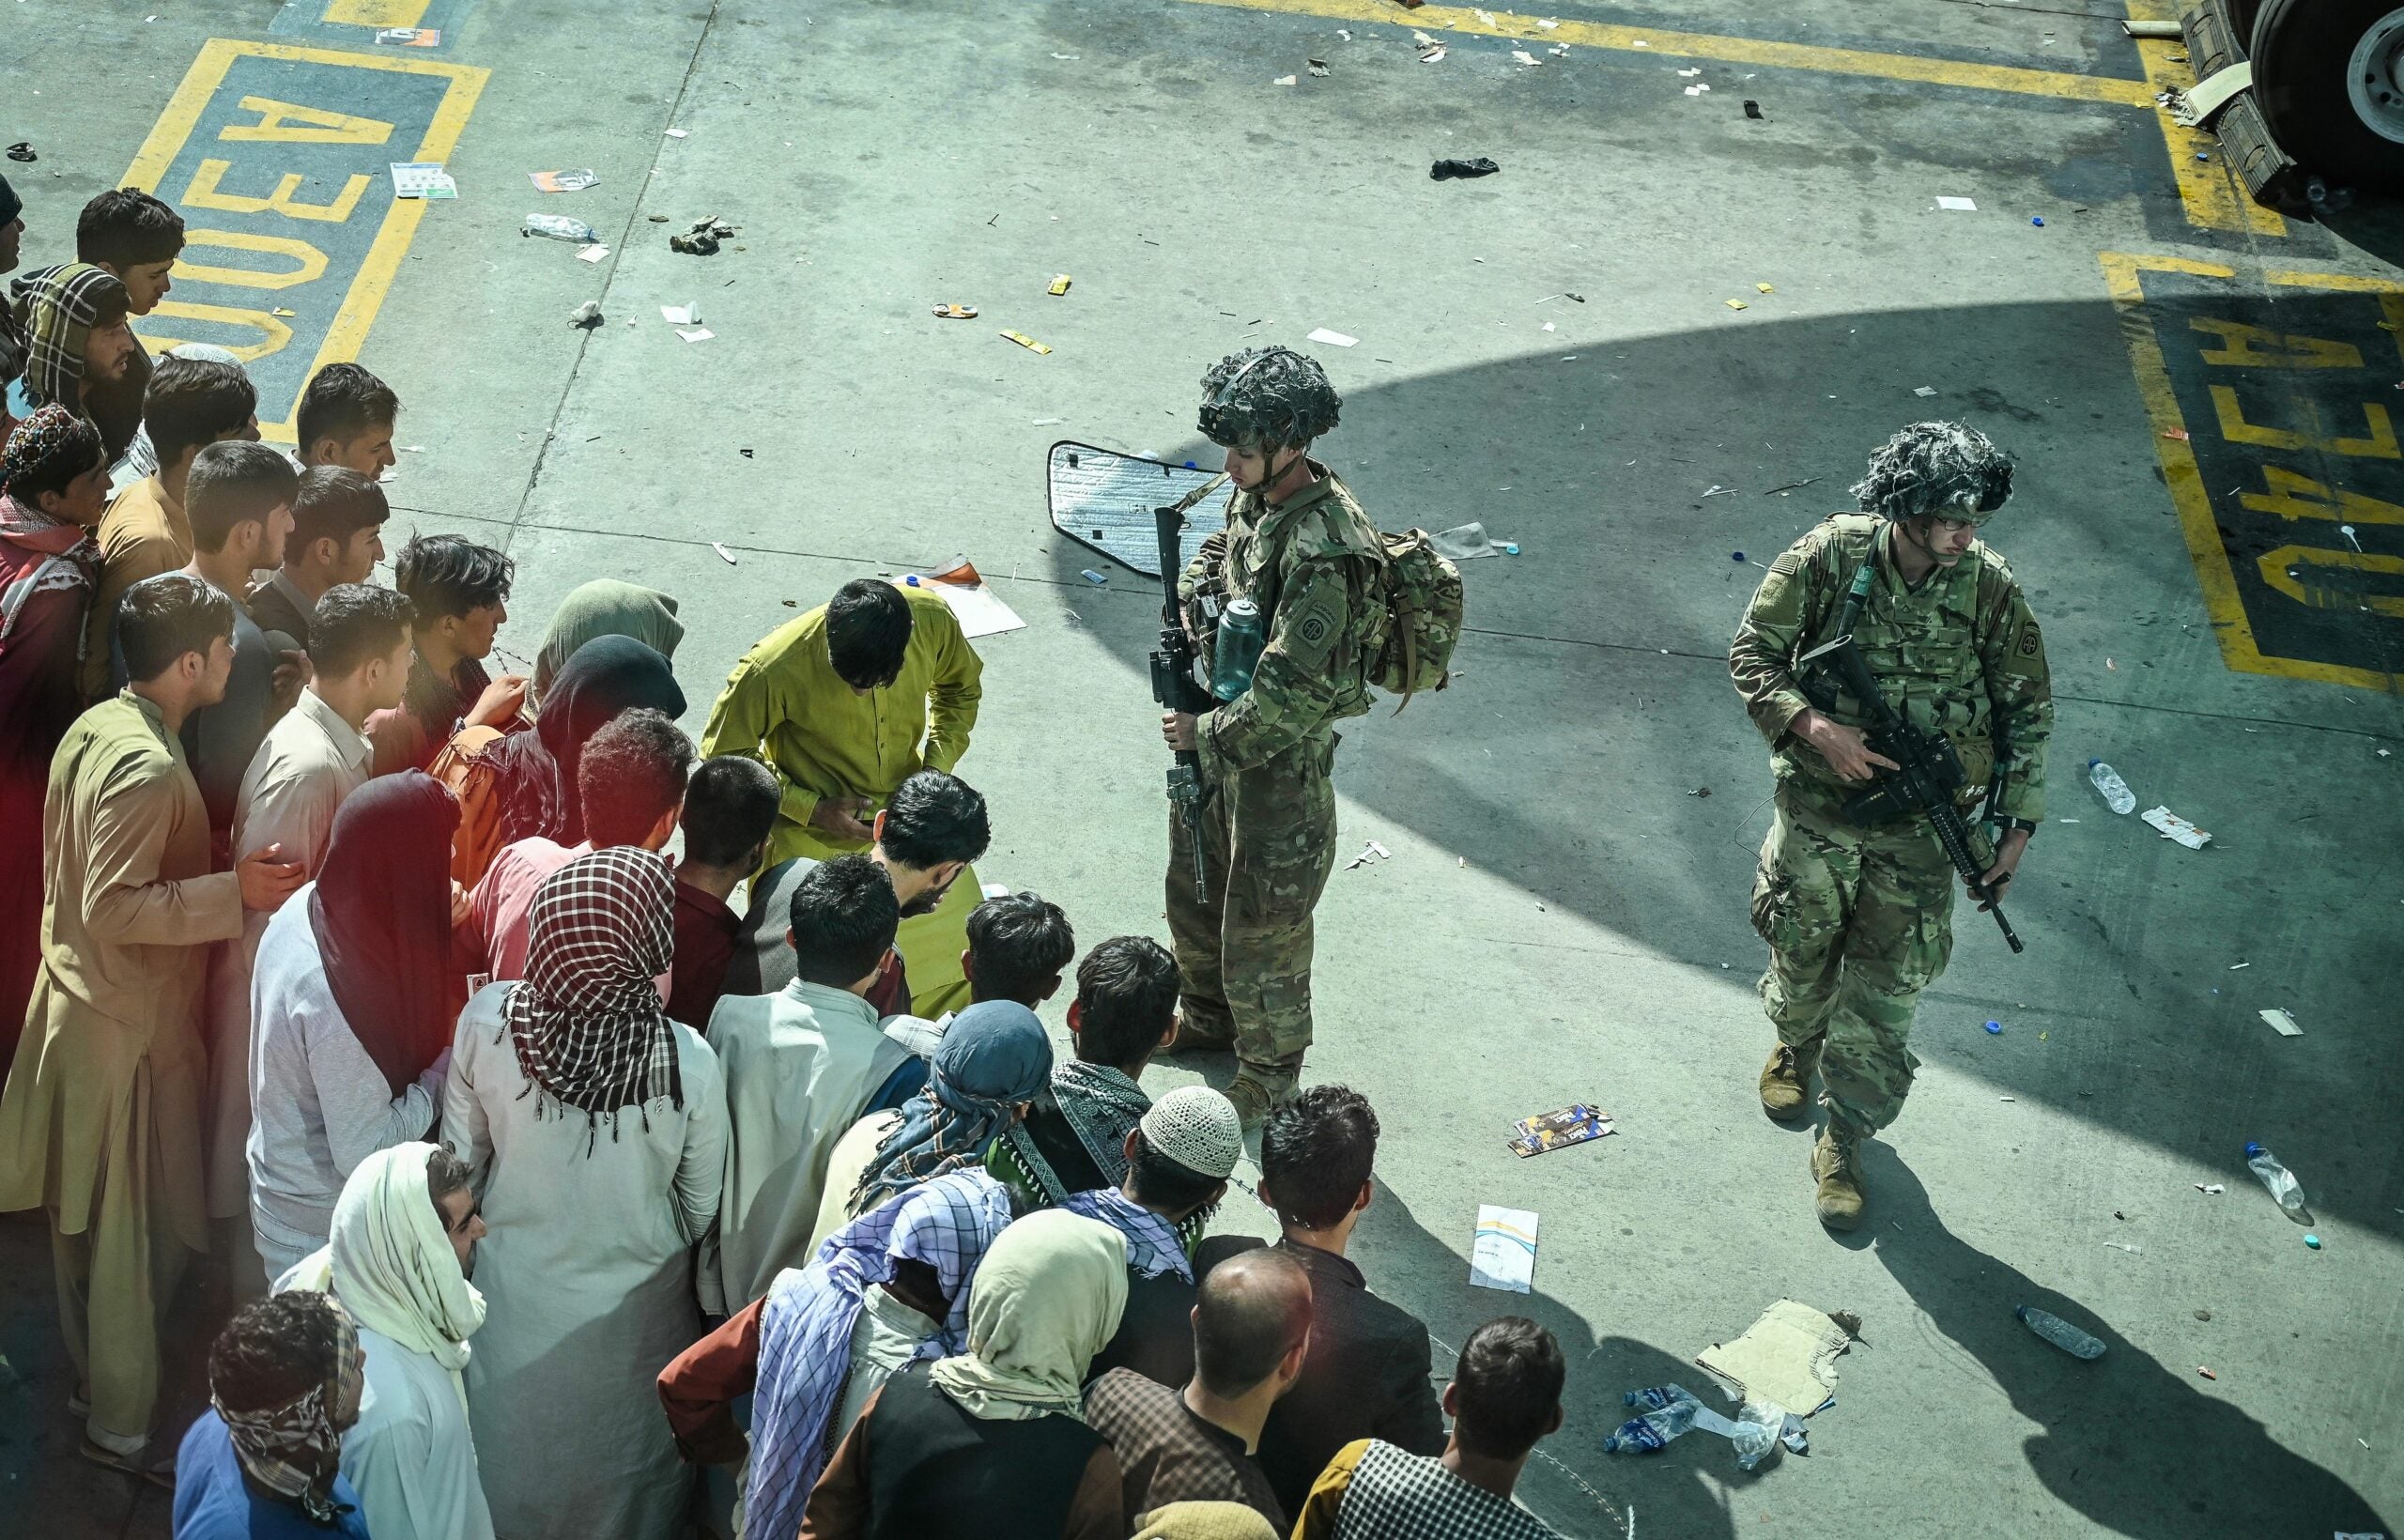 US soldiers stand guard as Afghan people wait at the Kabul airport in Kabul on August 16, 2021, after a stunningly swift end to Afghanistan's 20-year war, as thousands of people mobbed the city's airport trying to flee the group's feared hardline brand of Islamist rule. (Photo by Wakil Kohsar / AFP) (Photo by WAKIL KOHSAR/AFP via Getty Images)